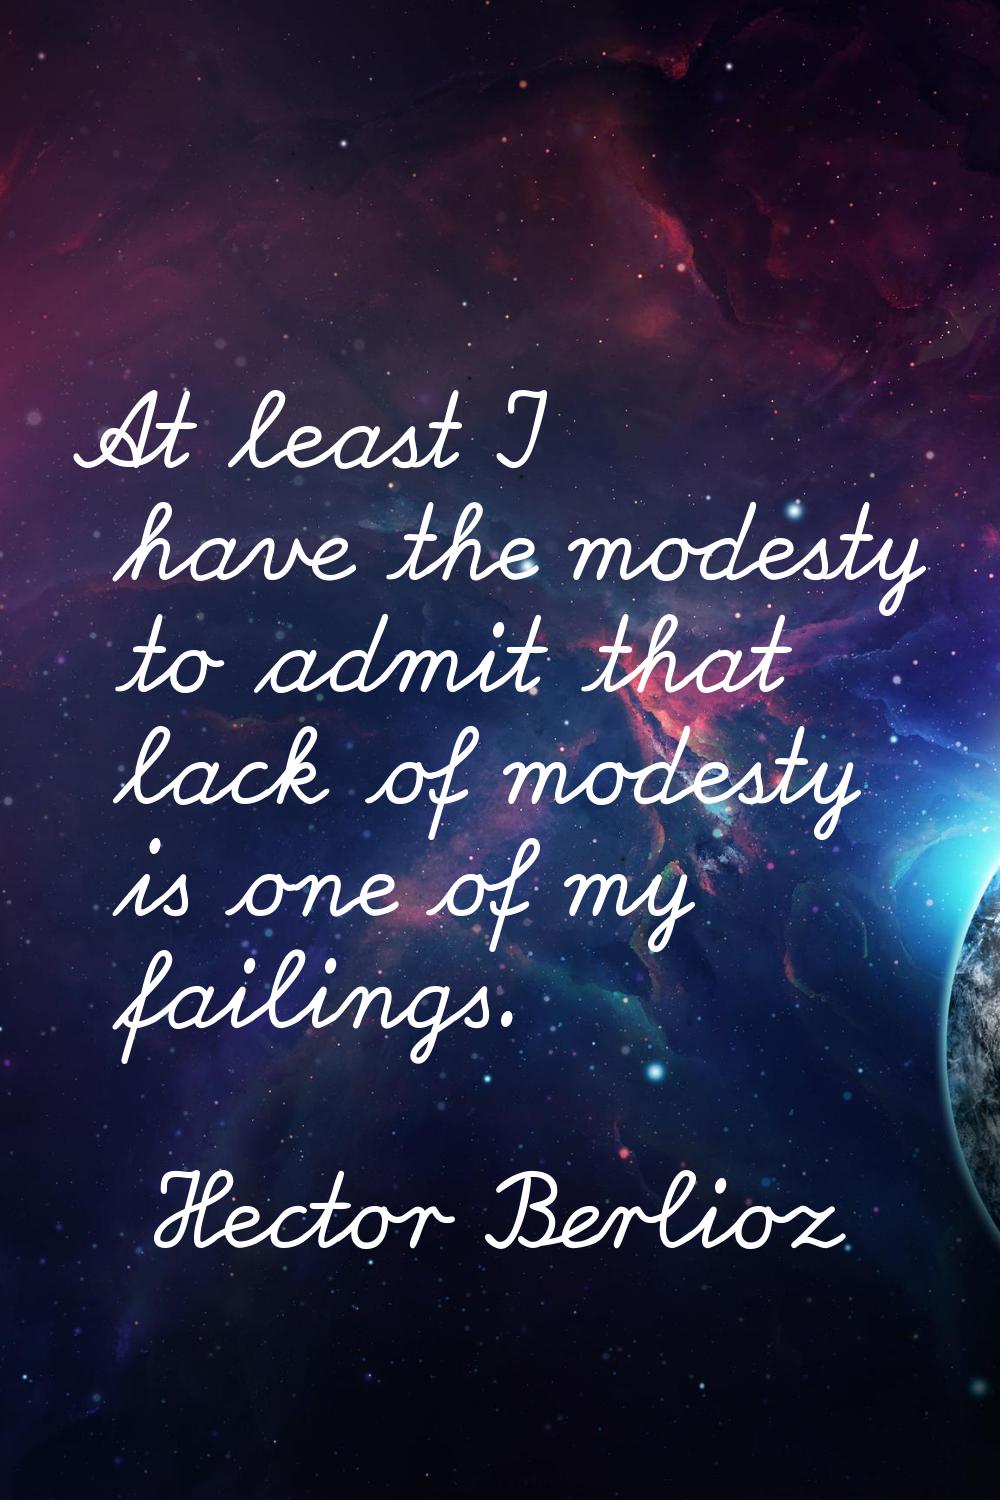 At least I have the modesty to admit that lack of modesty is one of my failings.